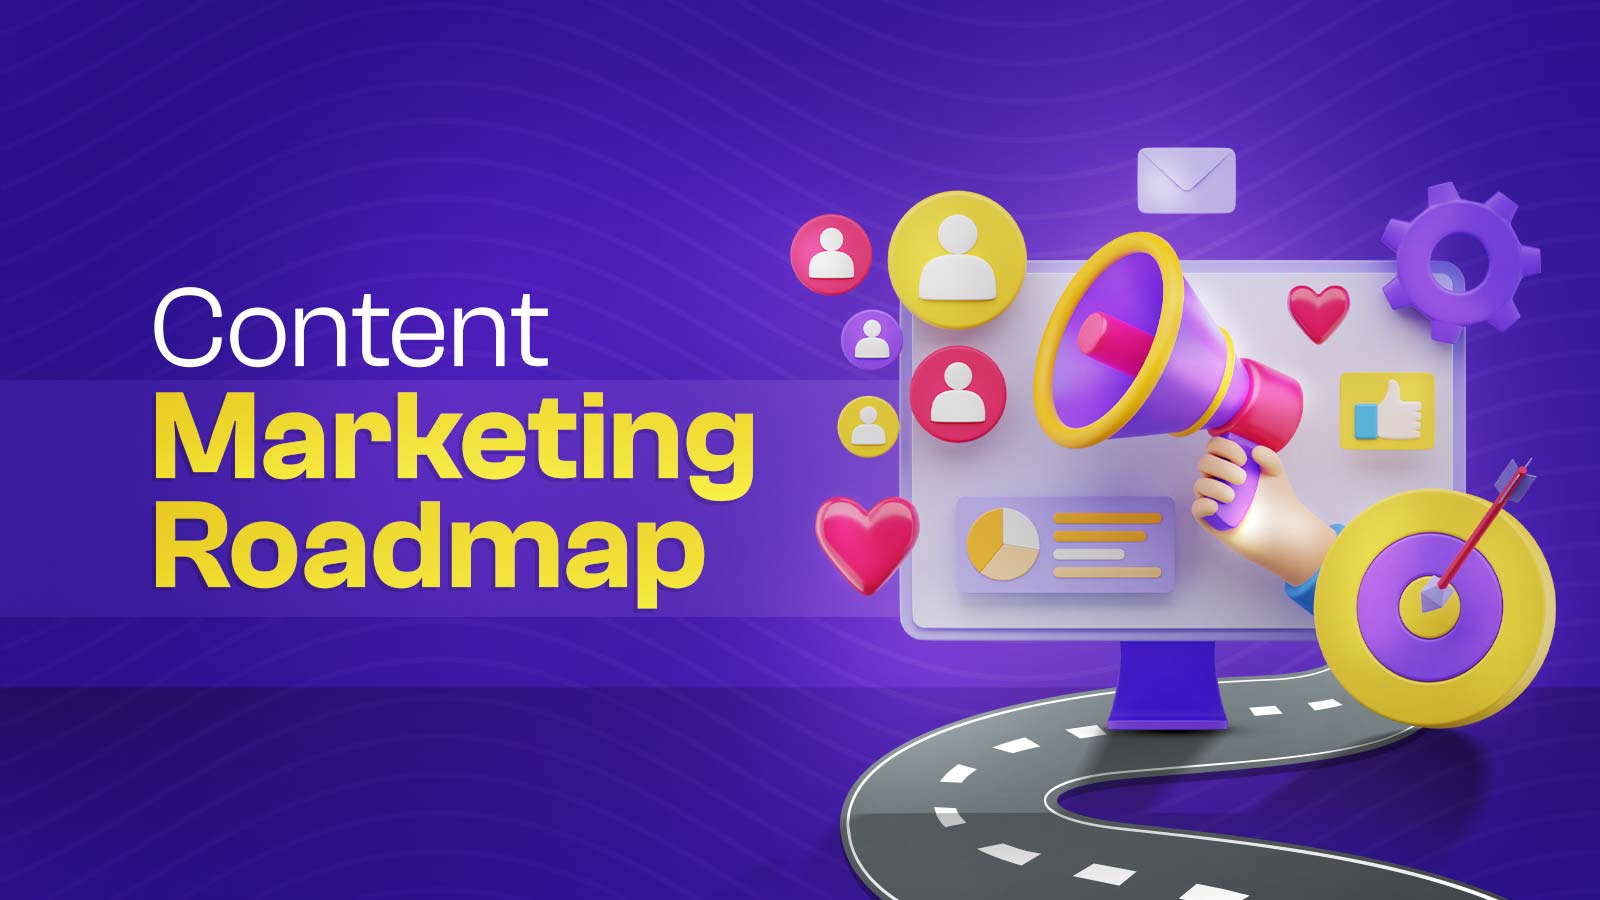 How To Make An Effective Content Marketing Roadmap?